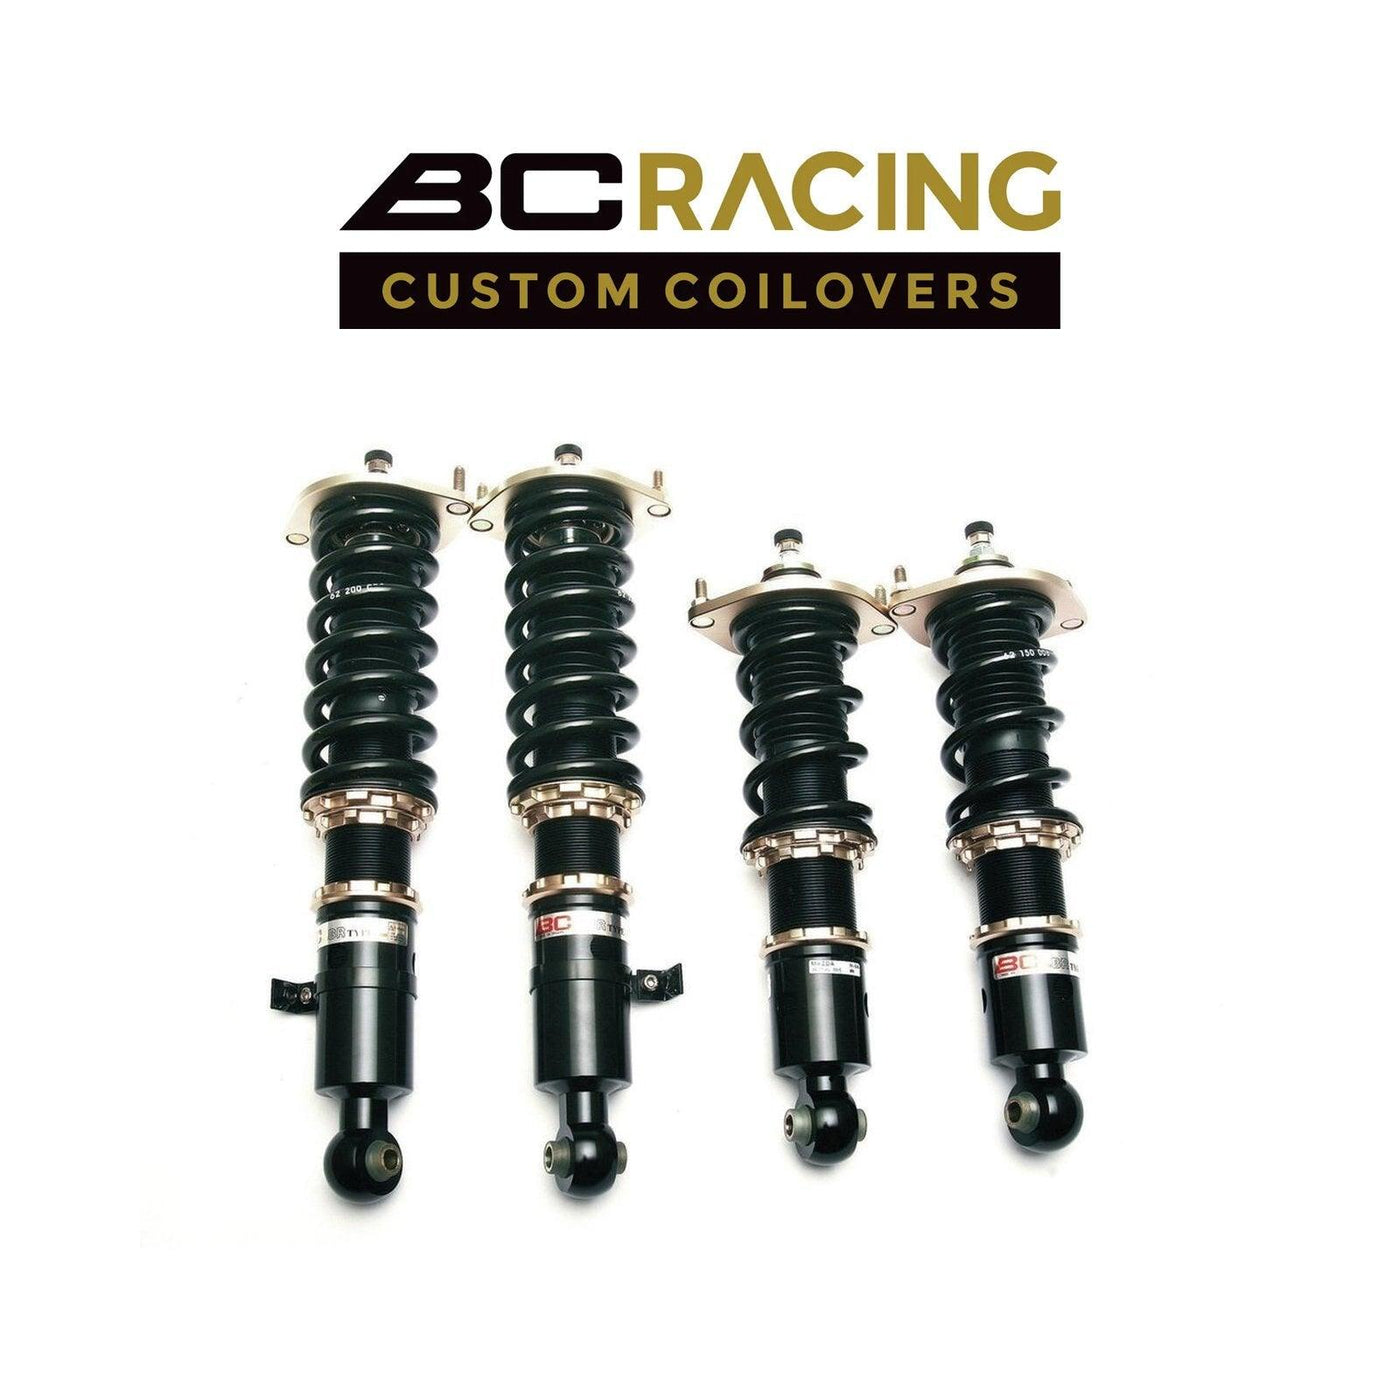 BC Racing Coilovers 2006-2011 BMW 3 Series Sedan E90 Extreme - Attacking the Clock Racing